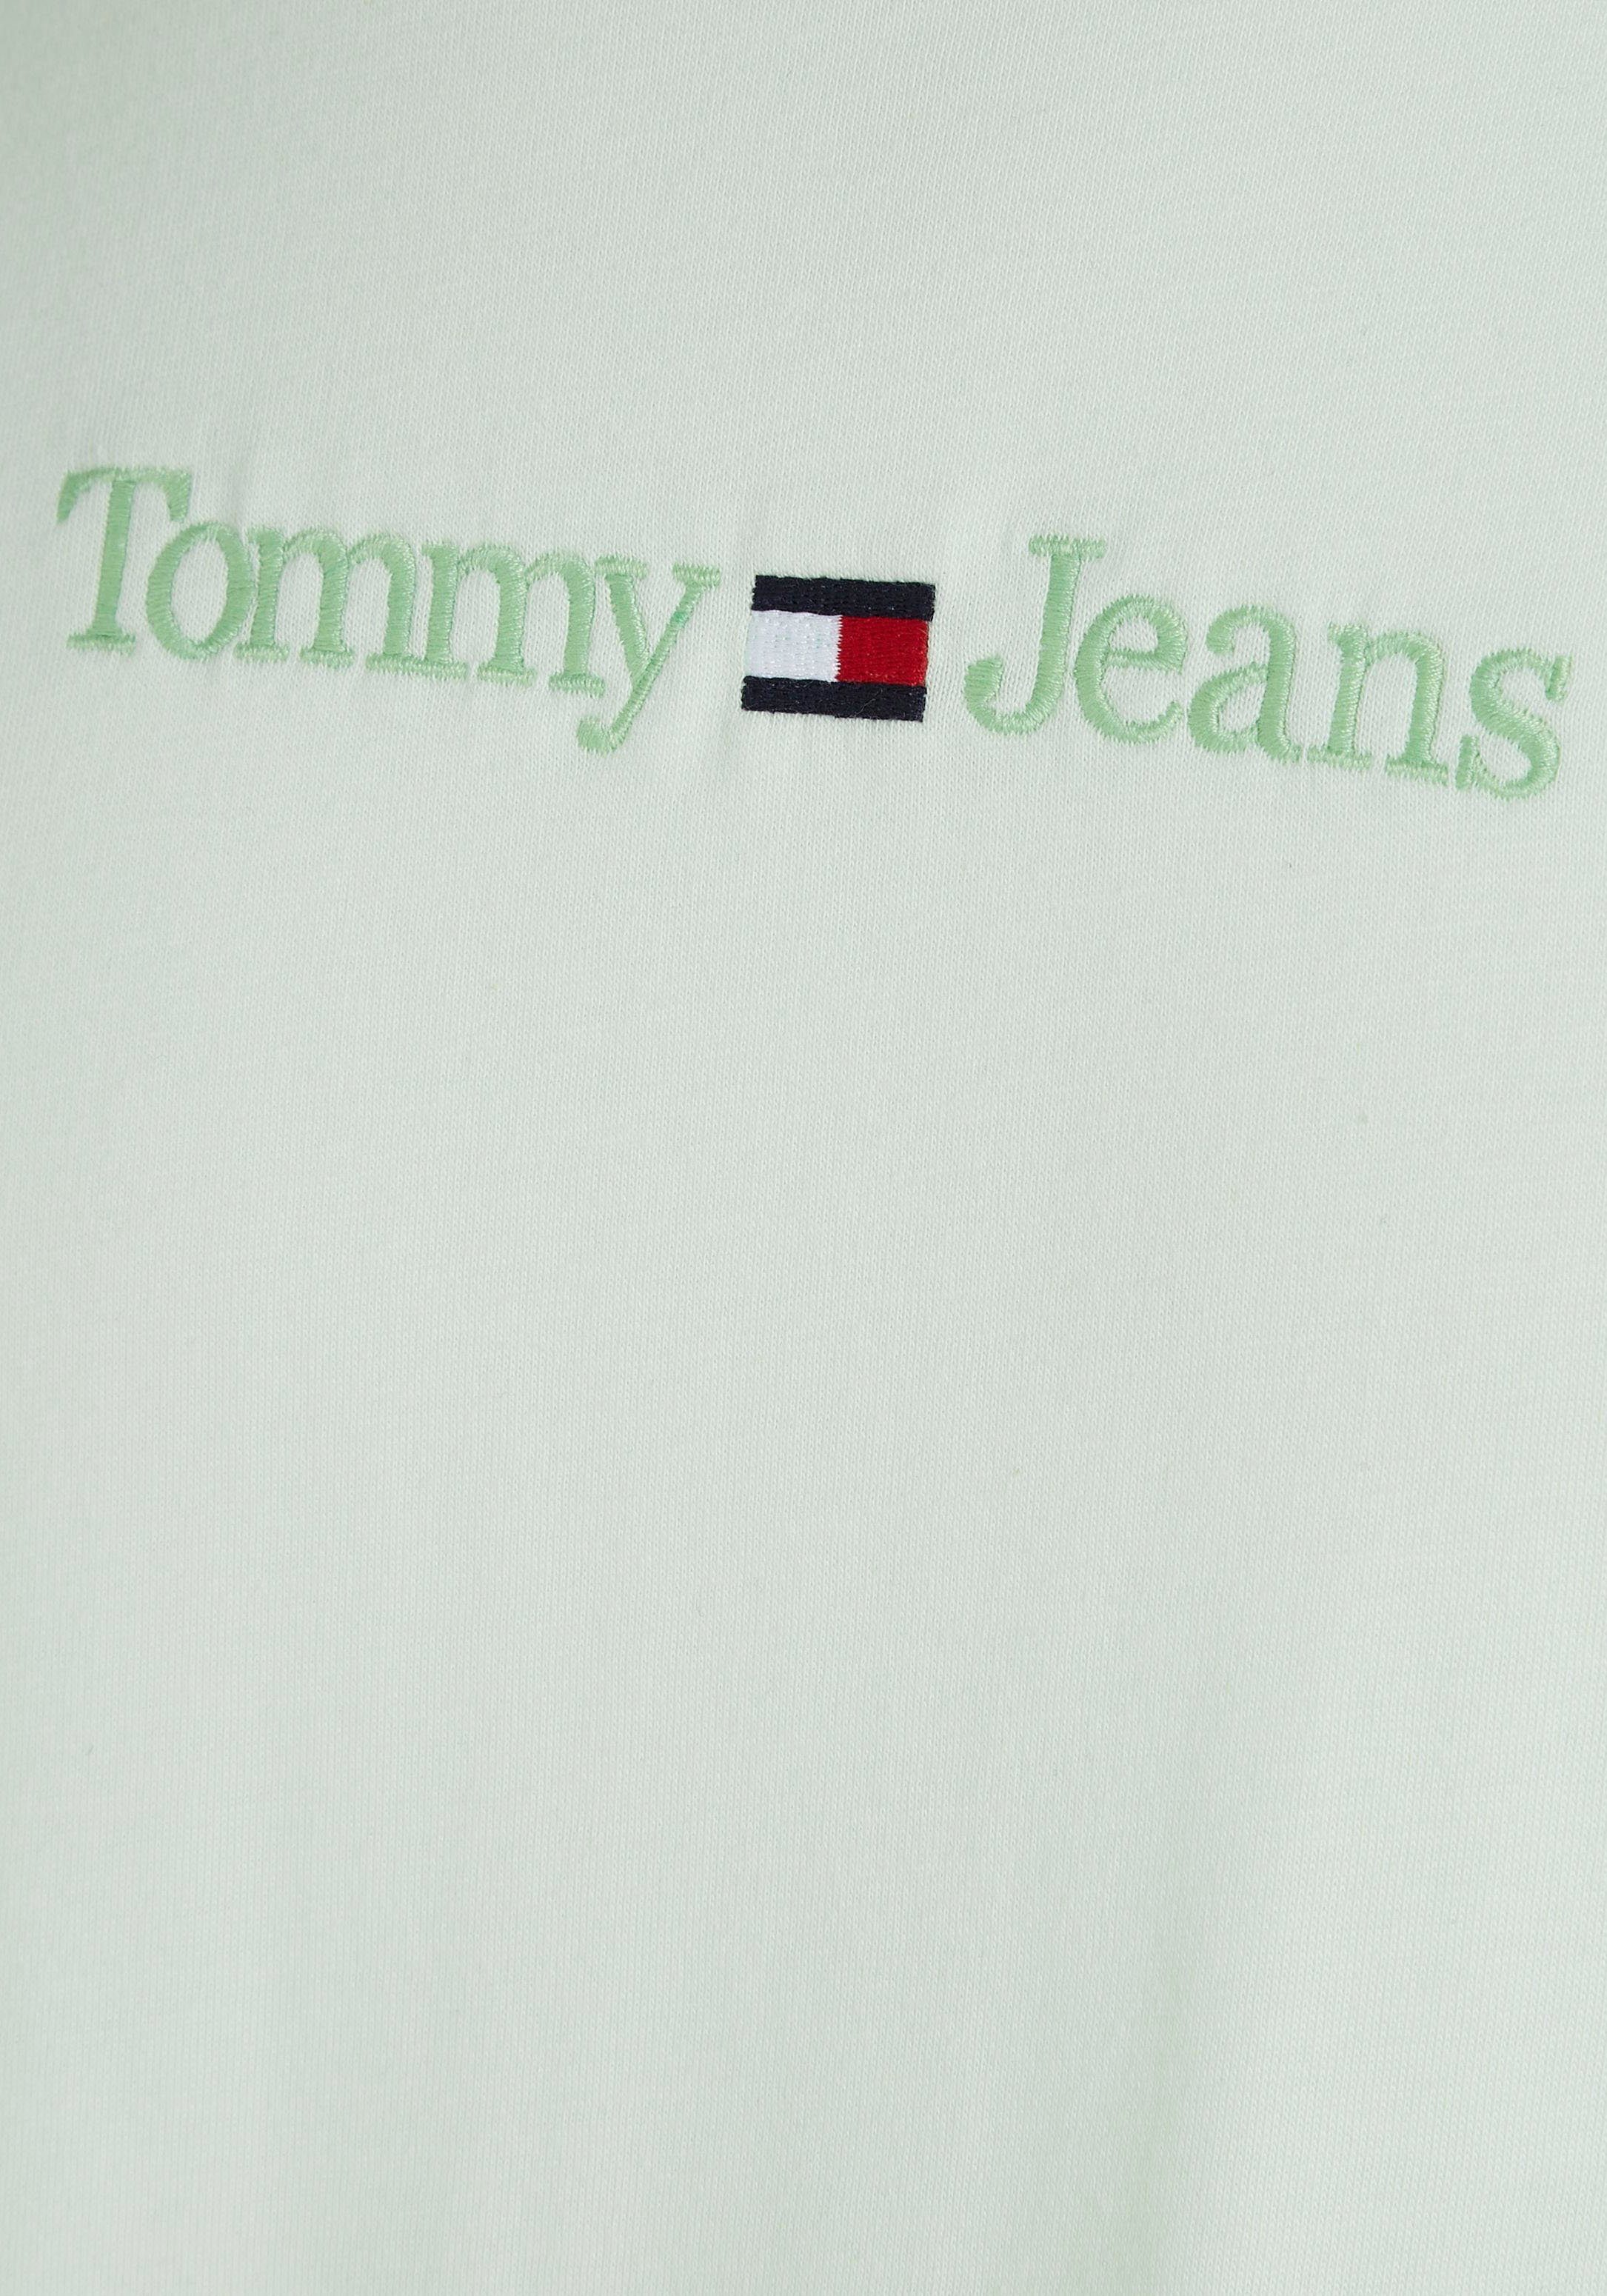 TEE T-Shirt SMALL TJM Minty Tommy Jeans TEXT CLSC